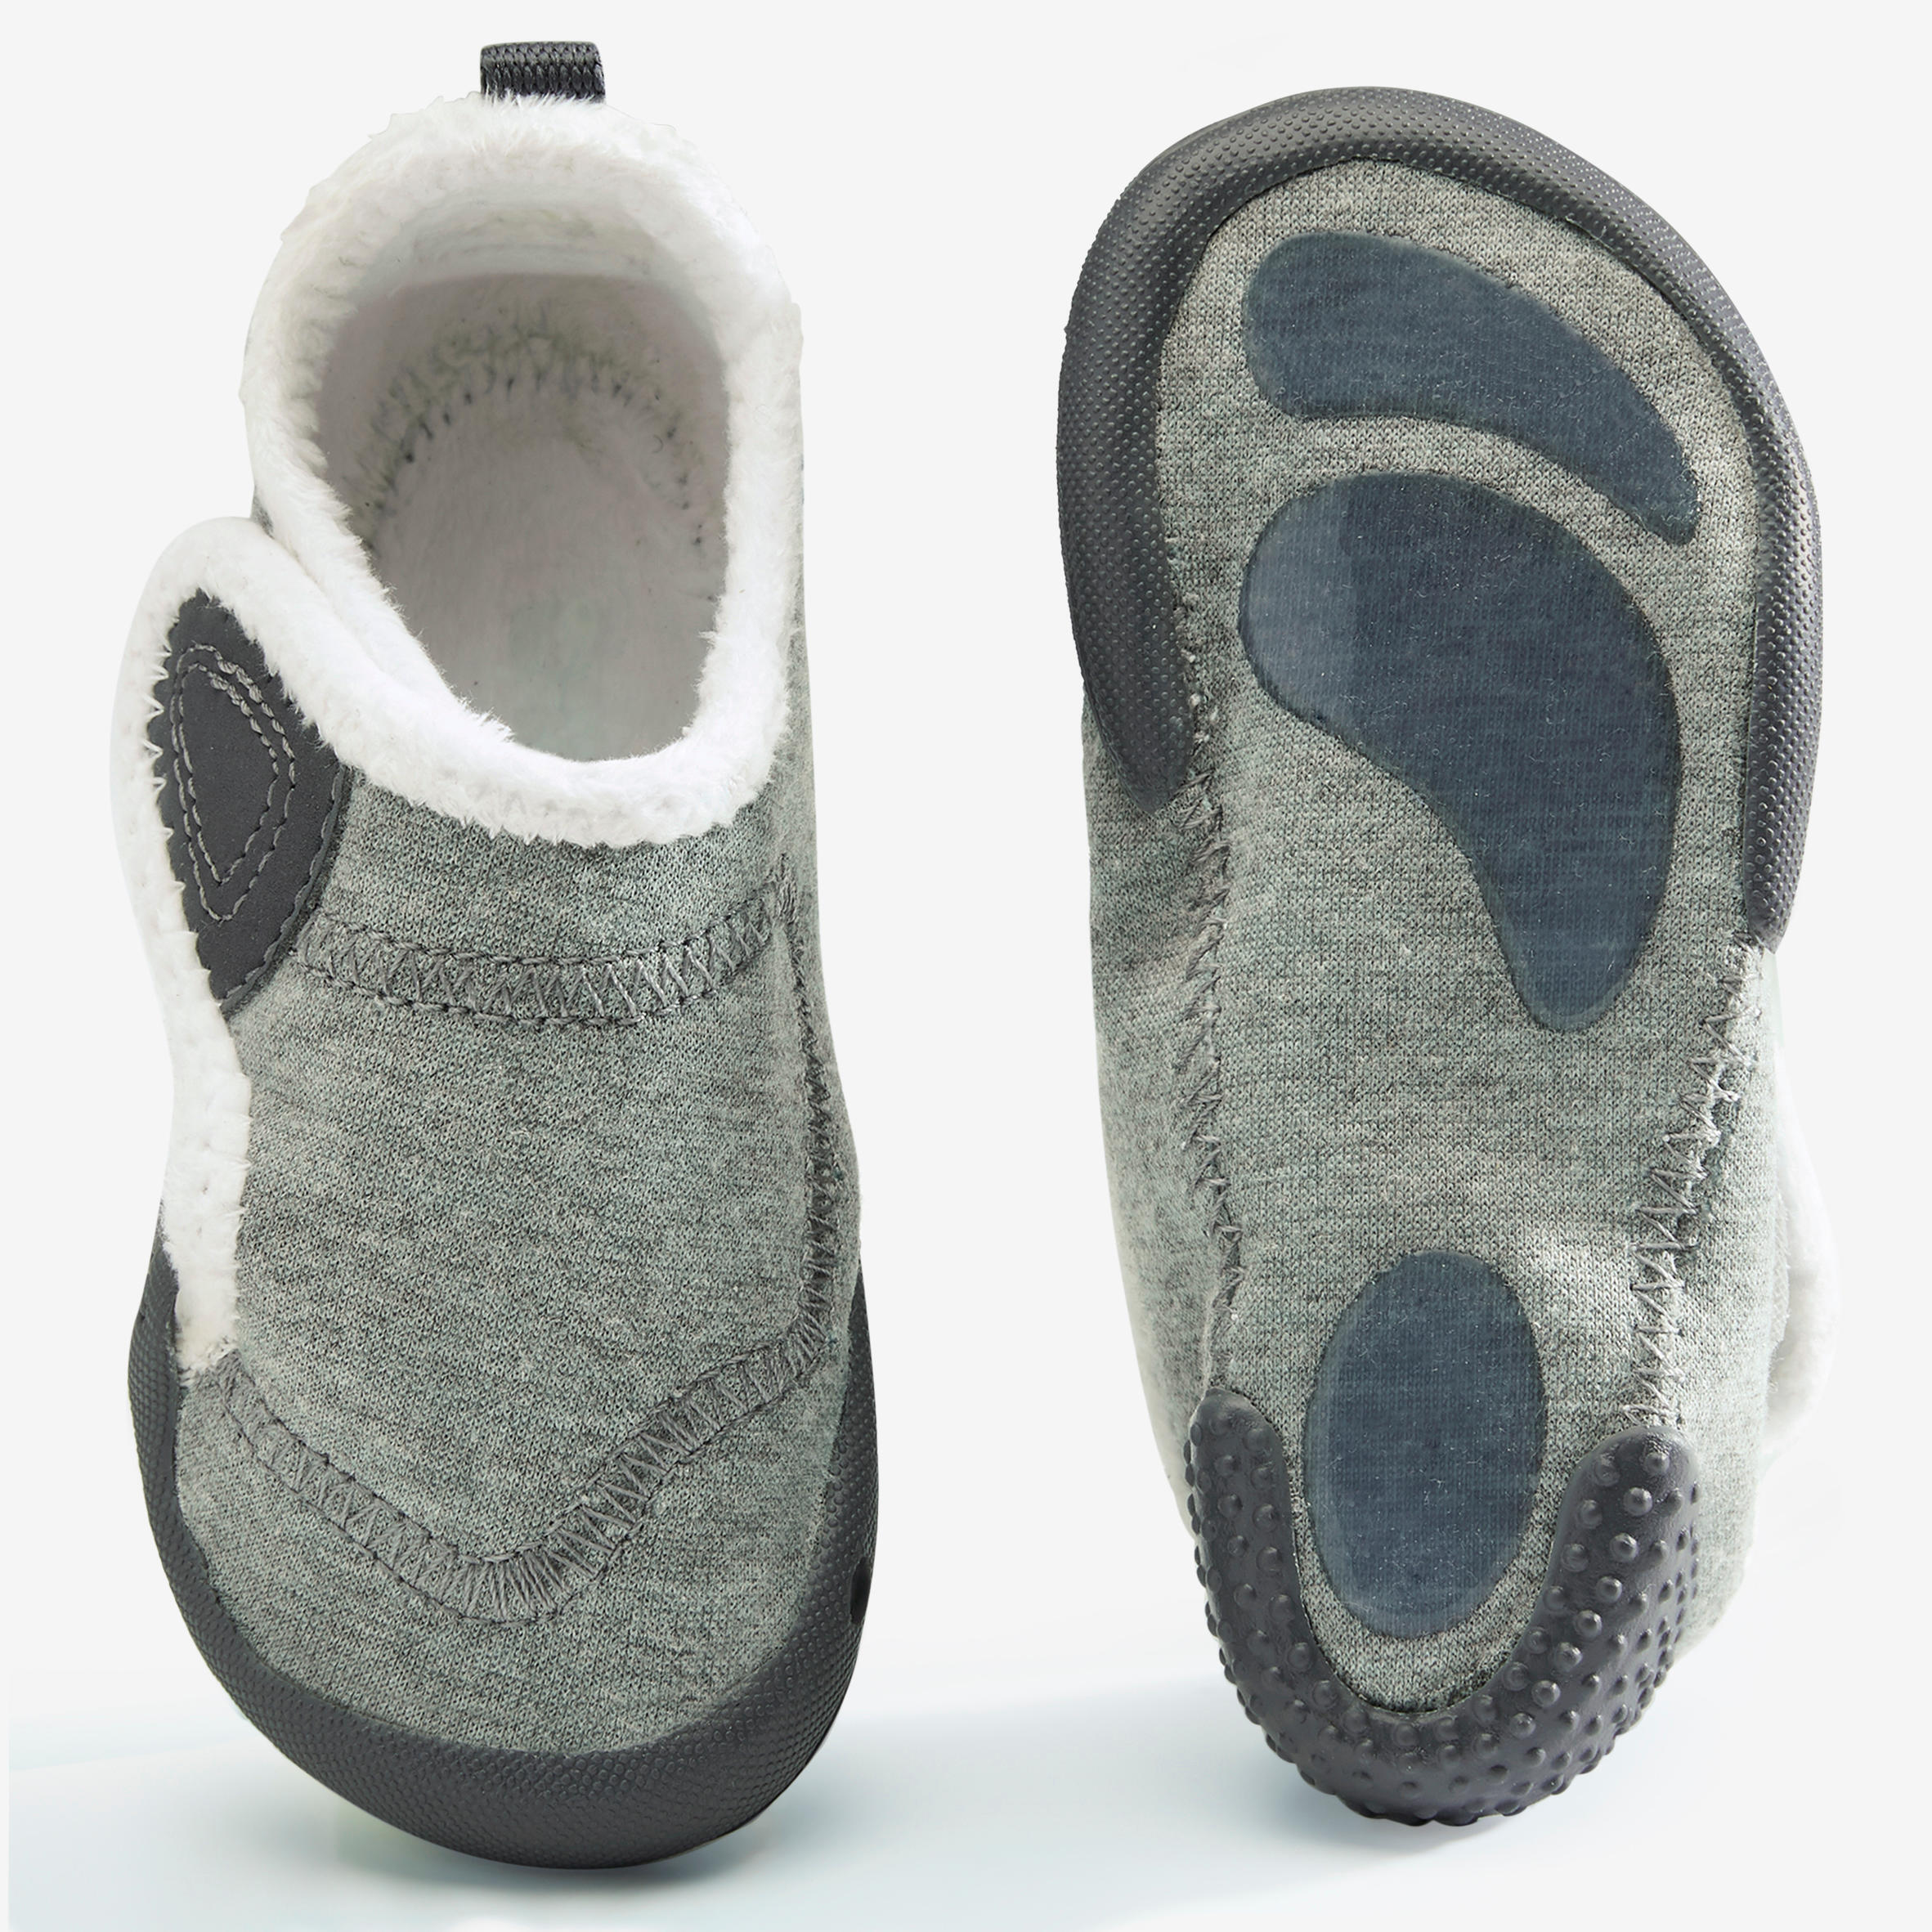 Kids' Soft and Non-Slip Bootee 4/8